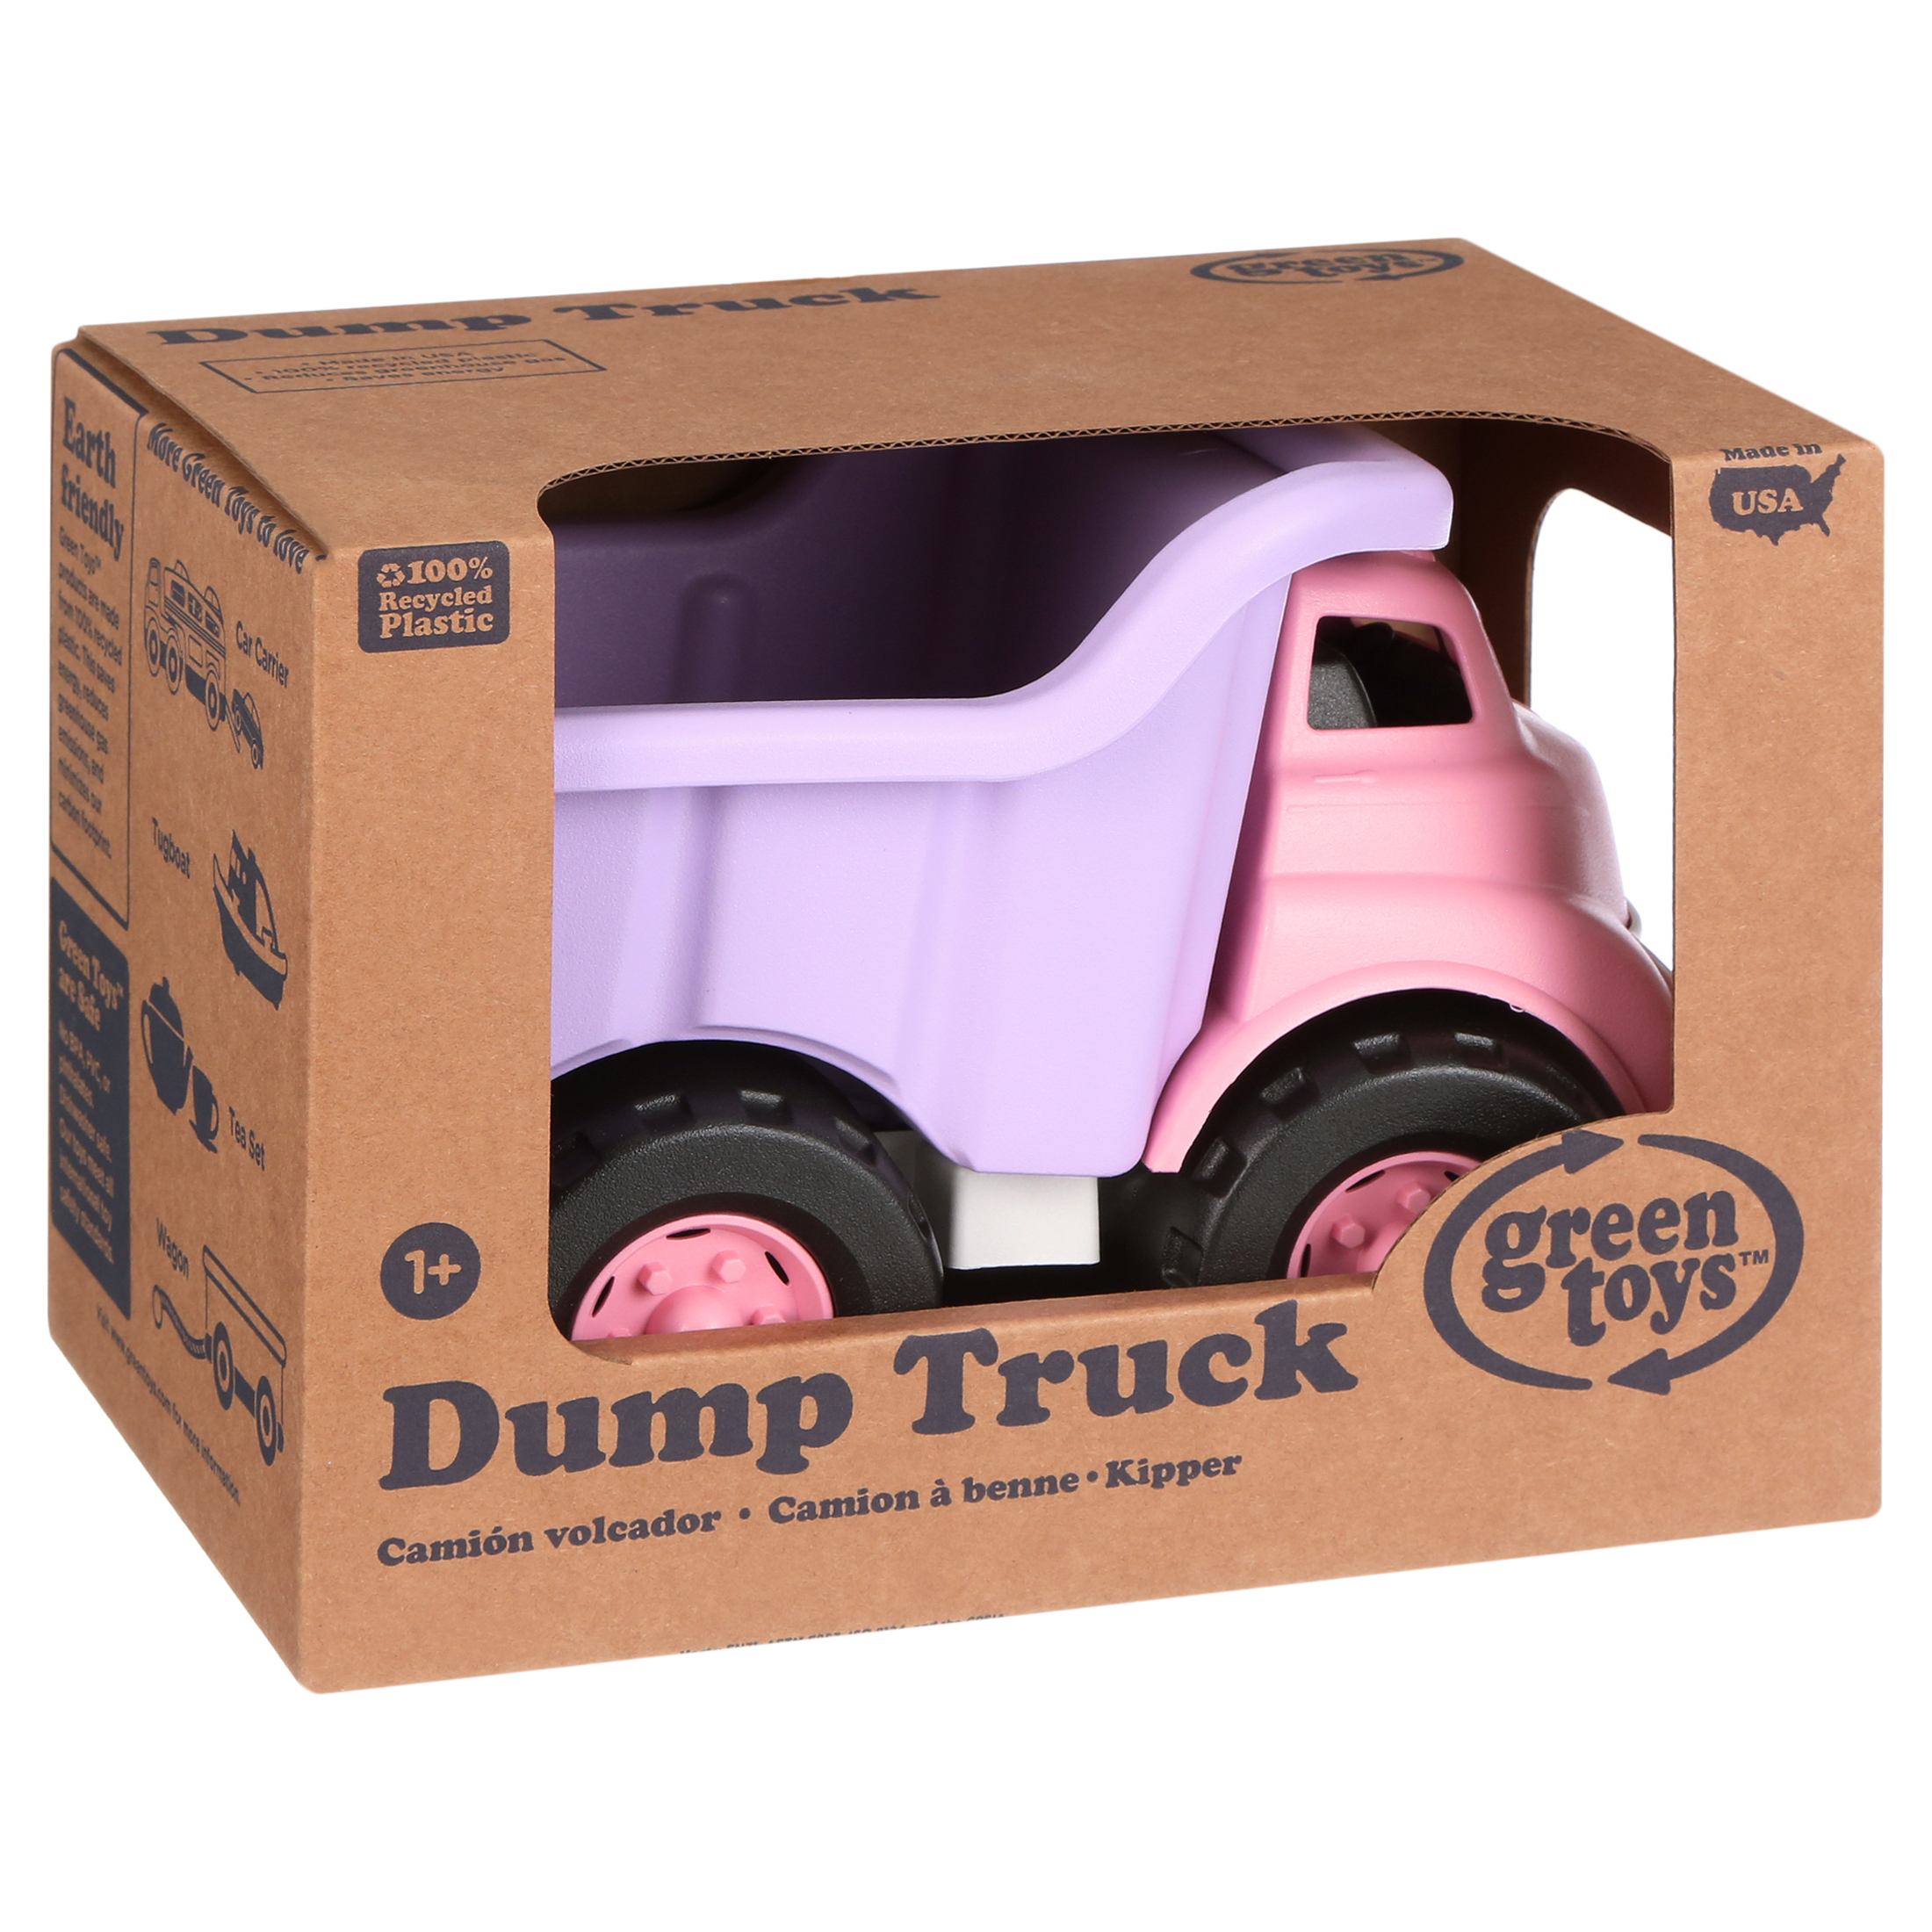 Green Toys Pink Dump Truck, for Toddlers Ages 1+ Made from 100% recycled plastic - image 5 of 10